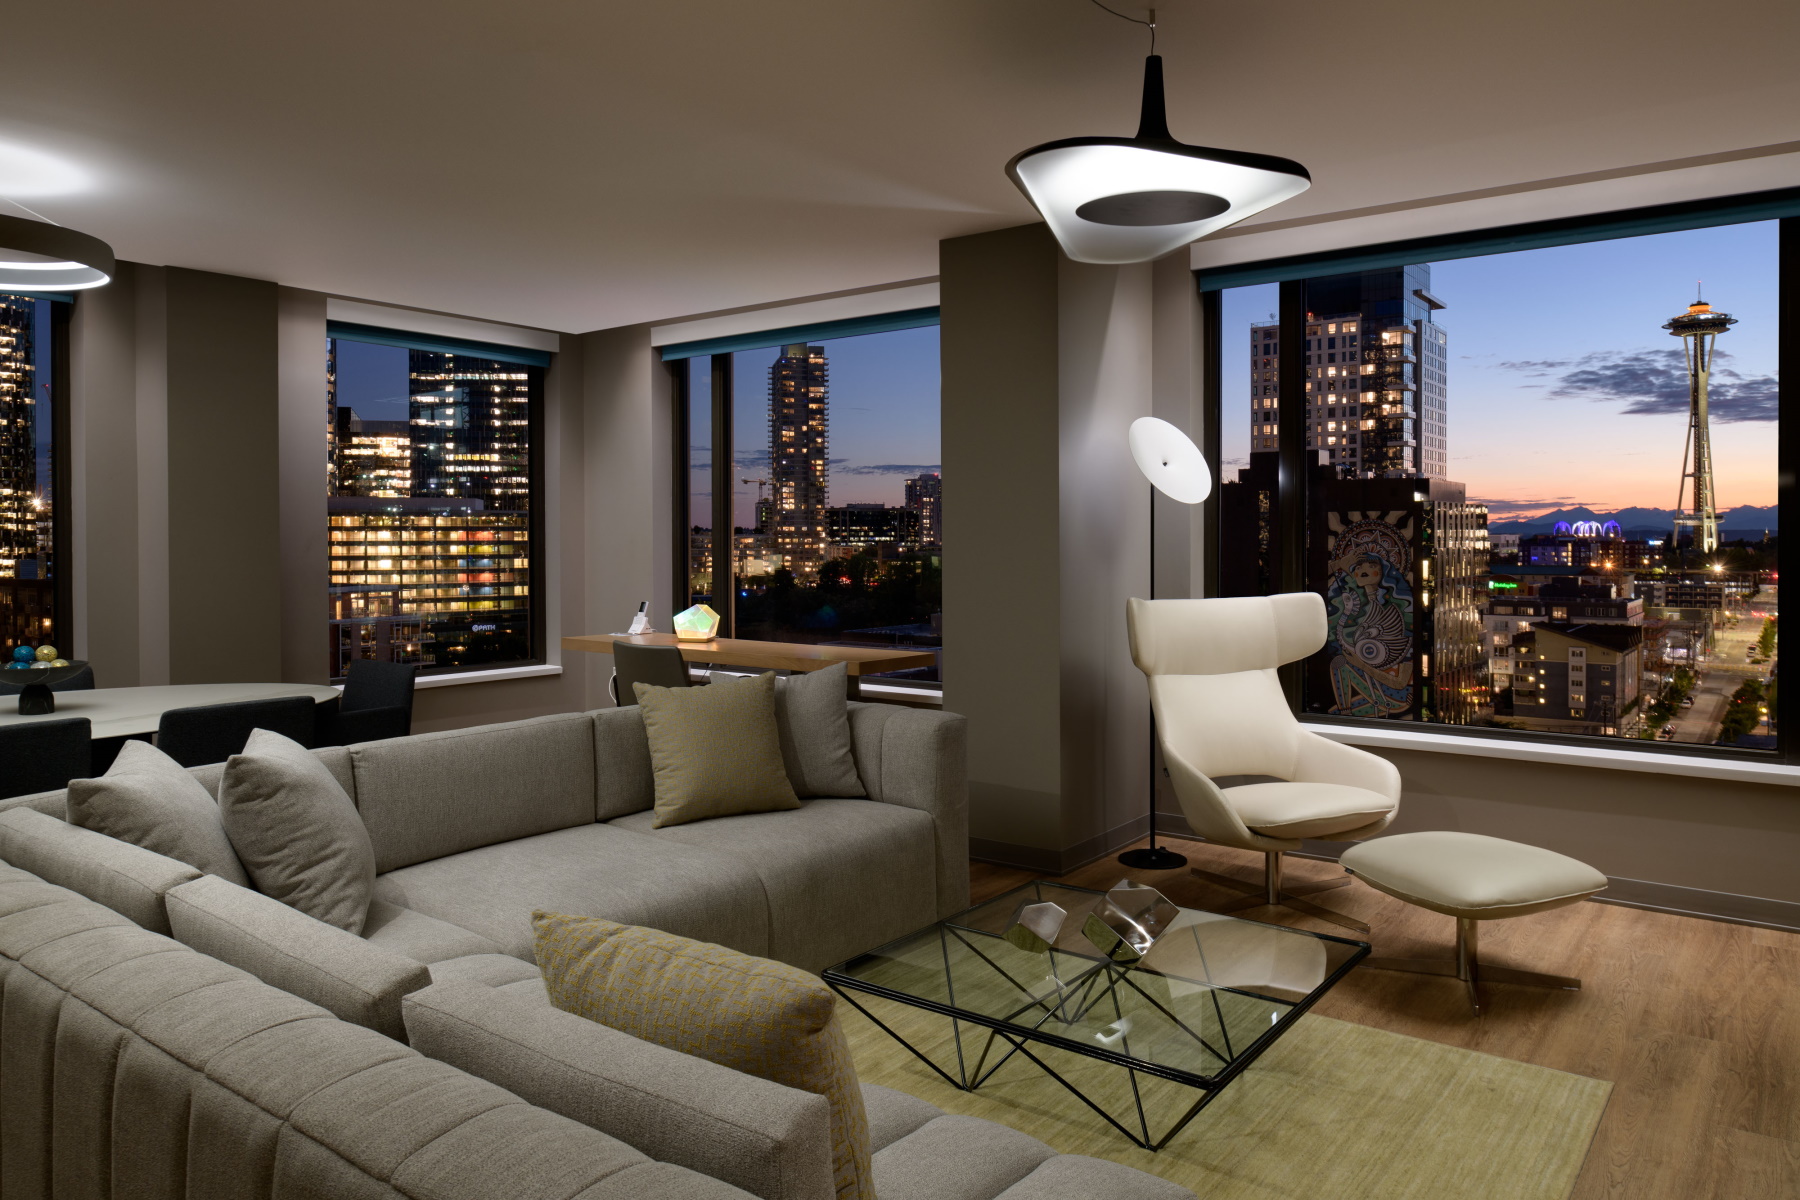 tp_seatn_small_pres_living_room_night_city_view